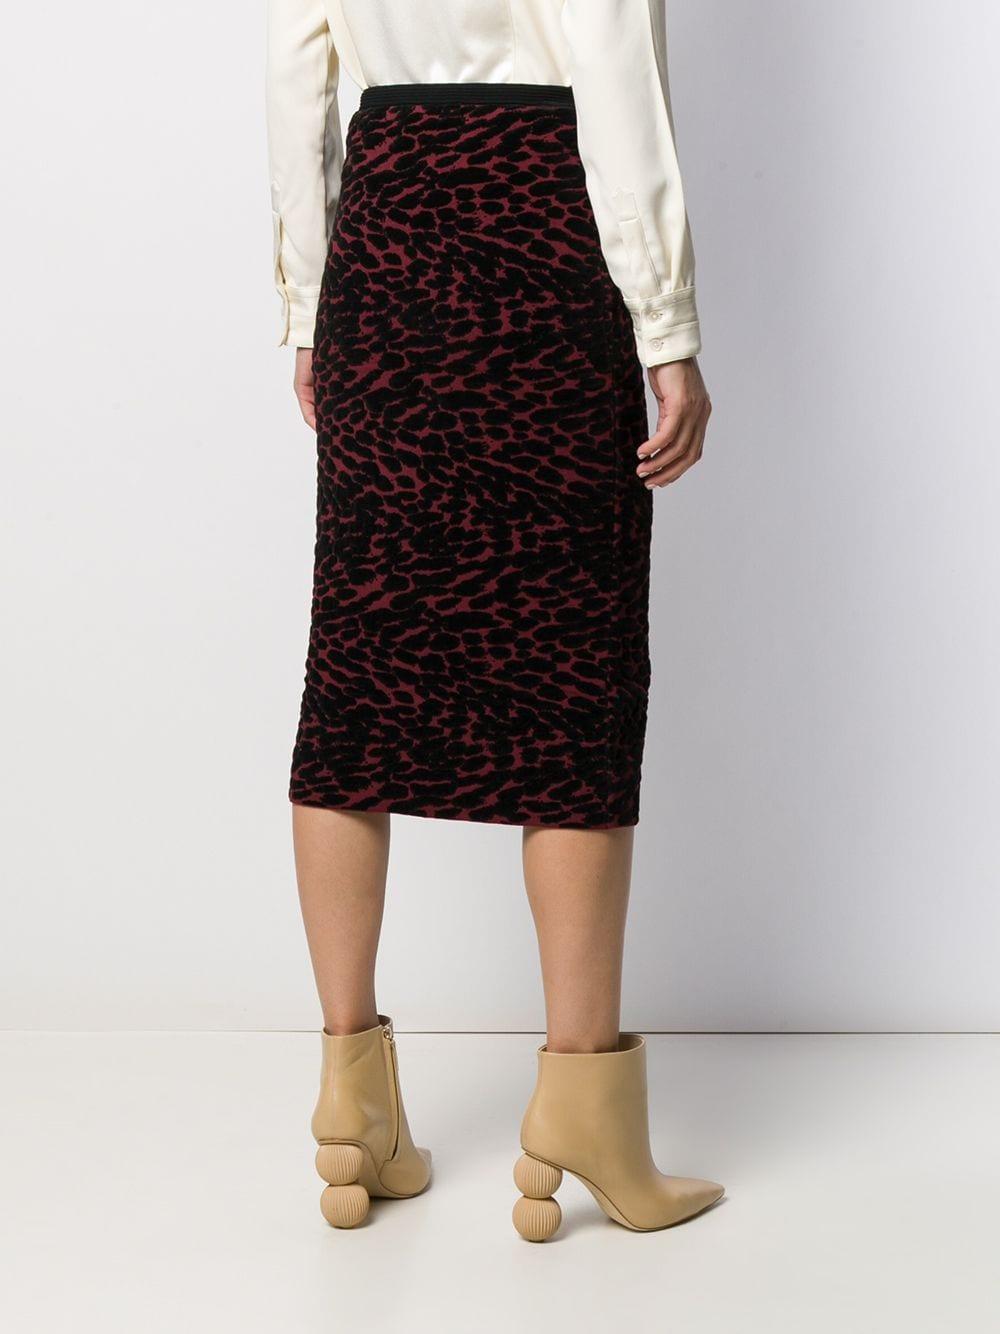 Diane von Furstenberg Synthetic Knitted Leopard Pencil Skirt in Red - Lyst